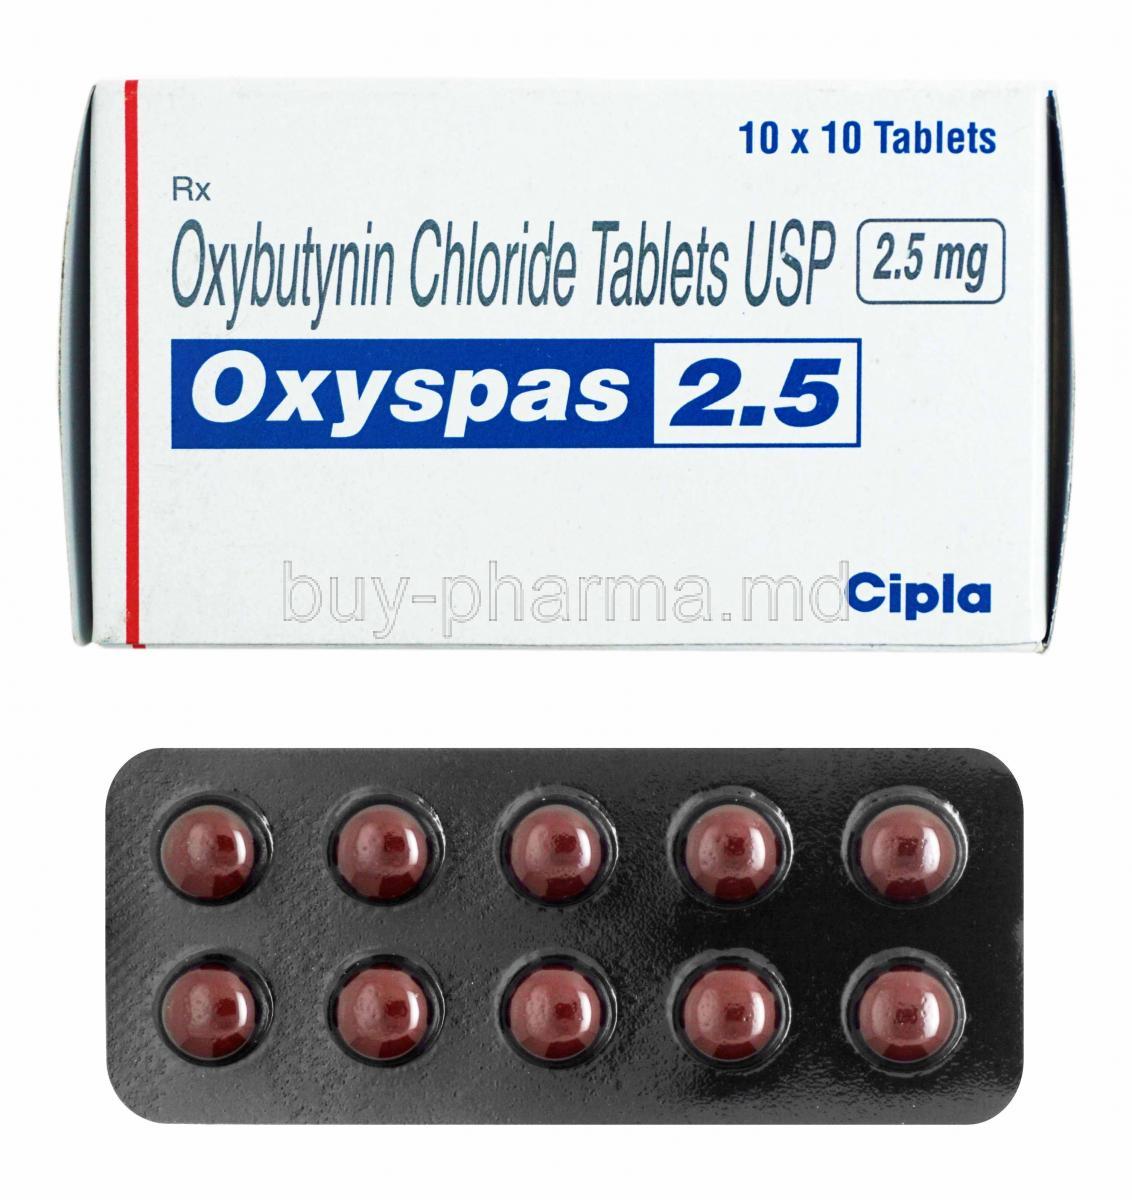 Oxyspas, Oxybutynin 2.5mg box and tablets